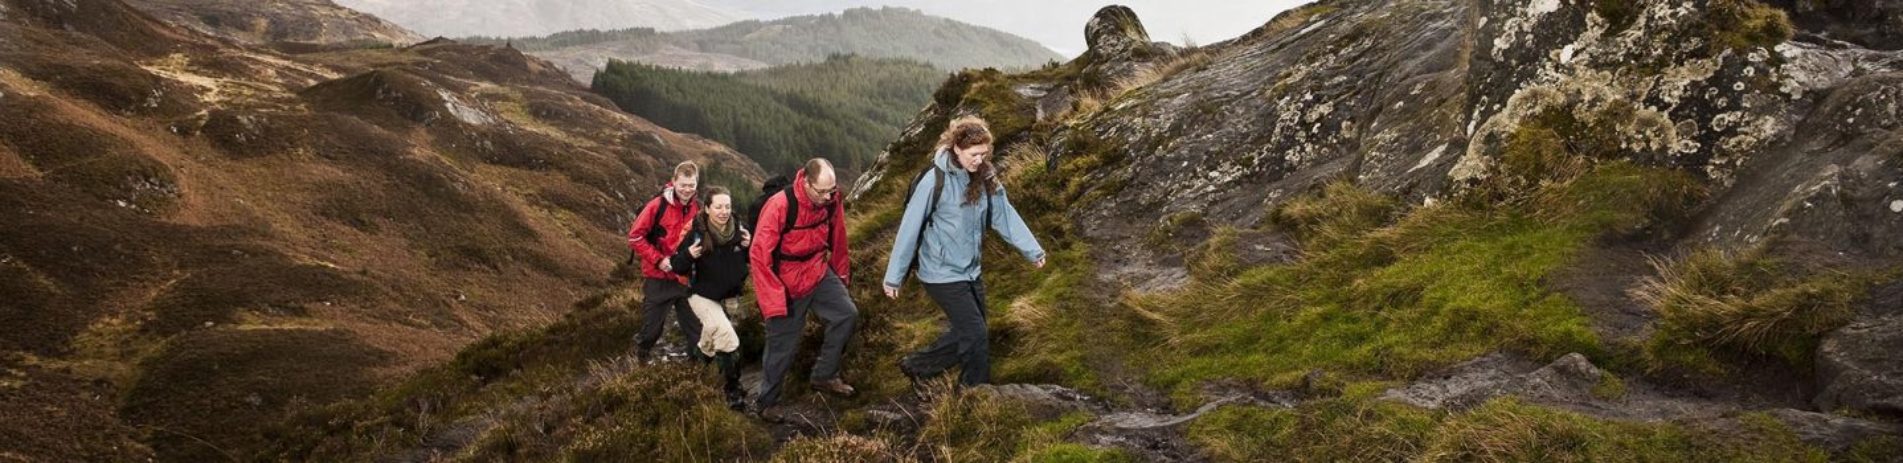 two-men-and-two-women-hiking-up-trail-on-conic-hill-they-are-dressed-in-colourful-outdoor-gear